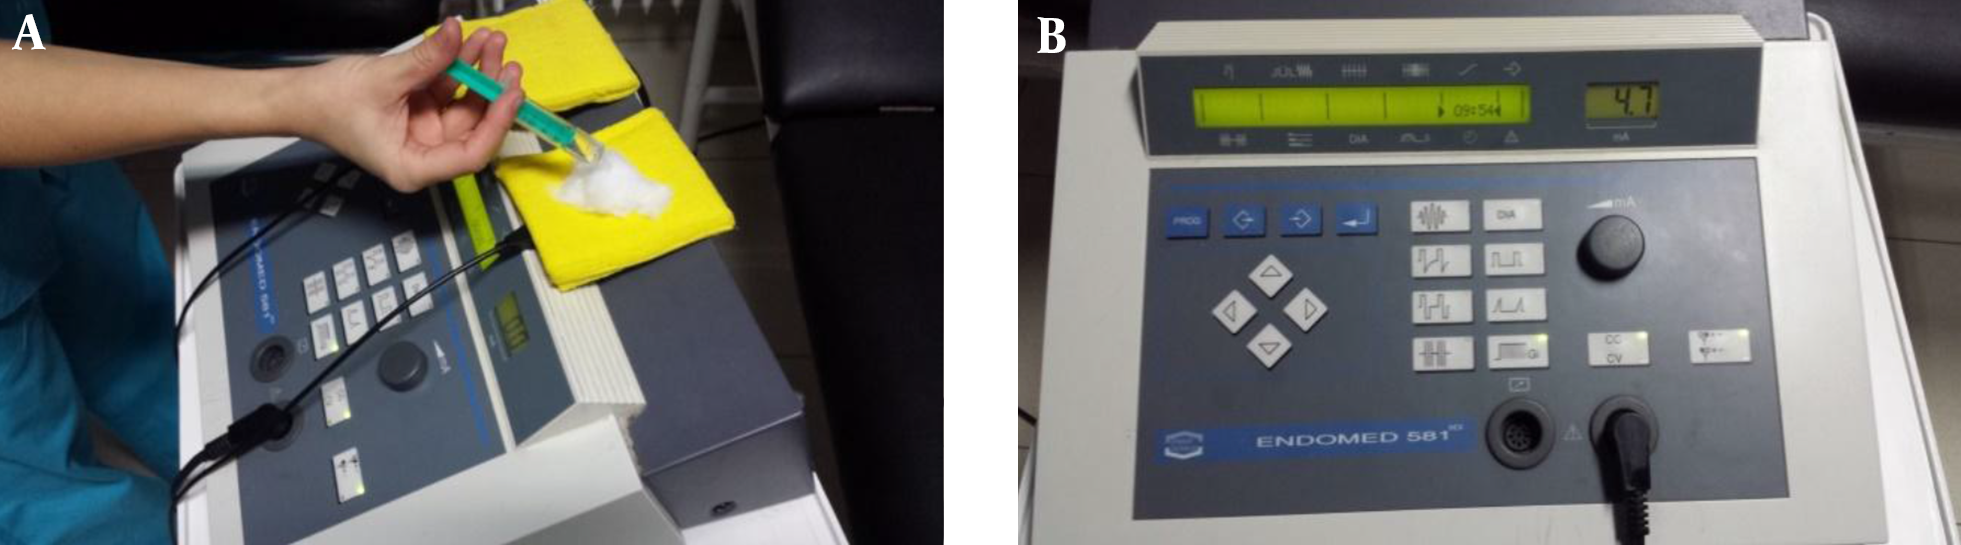 Acetic Acid 5%, 2 mL in a Gauze (A) are Dropped at the Cation Electrode (Negative Electrode), For Iontophoresis Treatment, a Galvanic Current at 4.7 mA Intensity Was Applied for 10 Minutes (B)